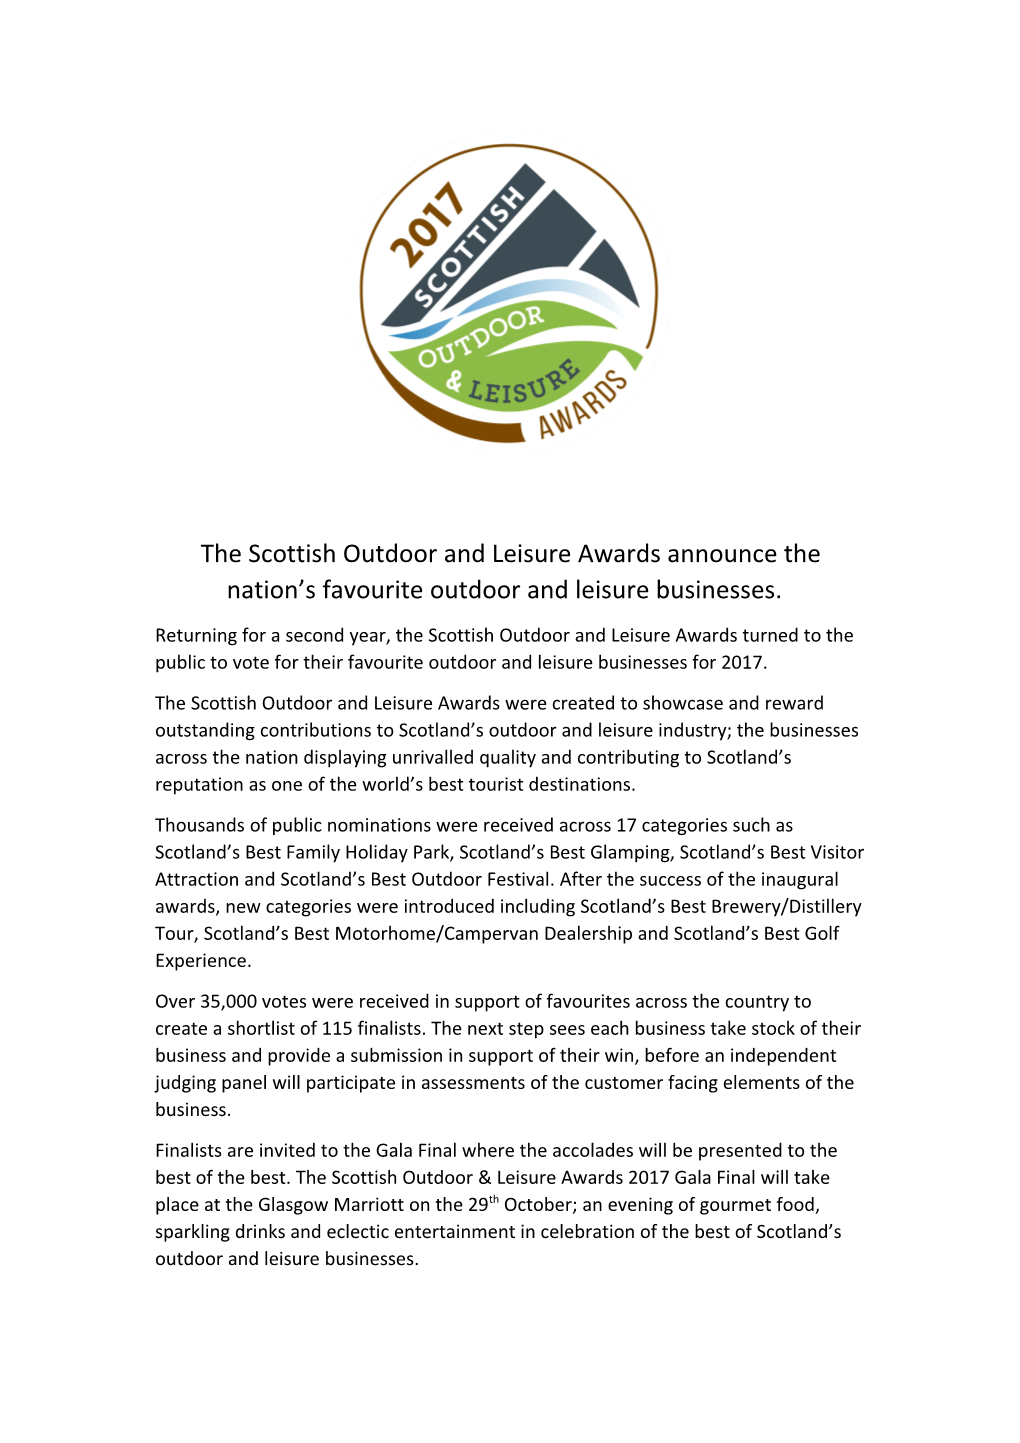 The Scottish Outdoor and Leisure Awards Announce the Nation S Favourite Outdoor and Leisure